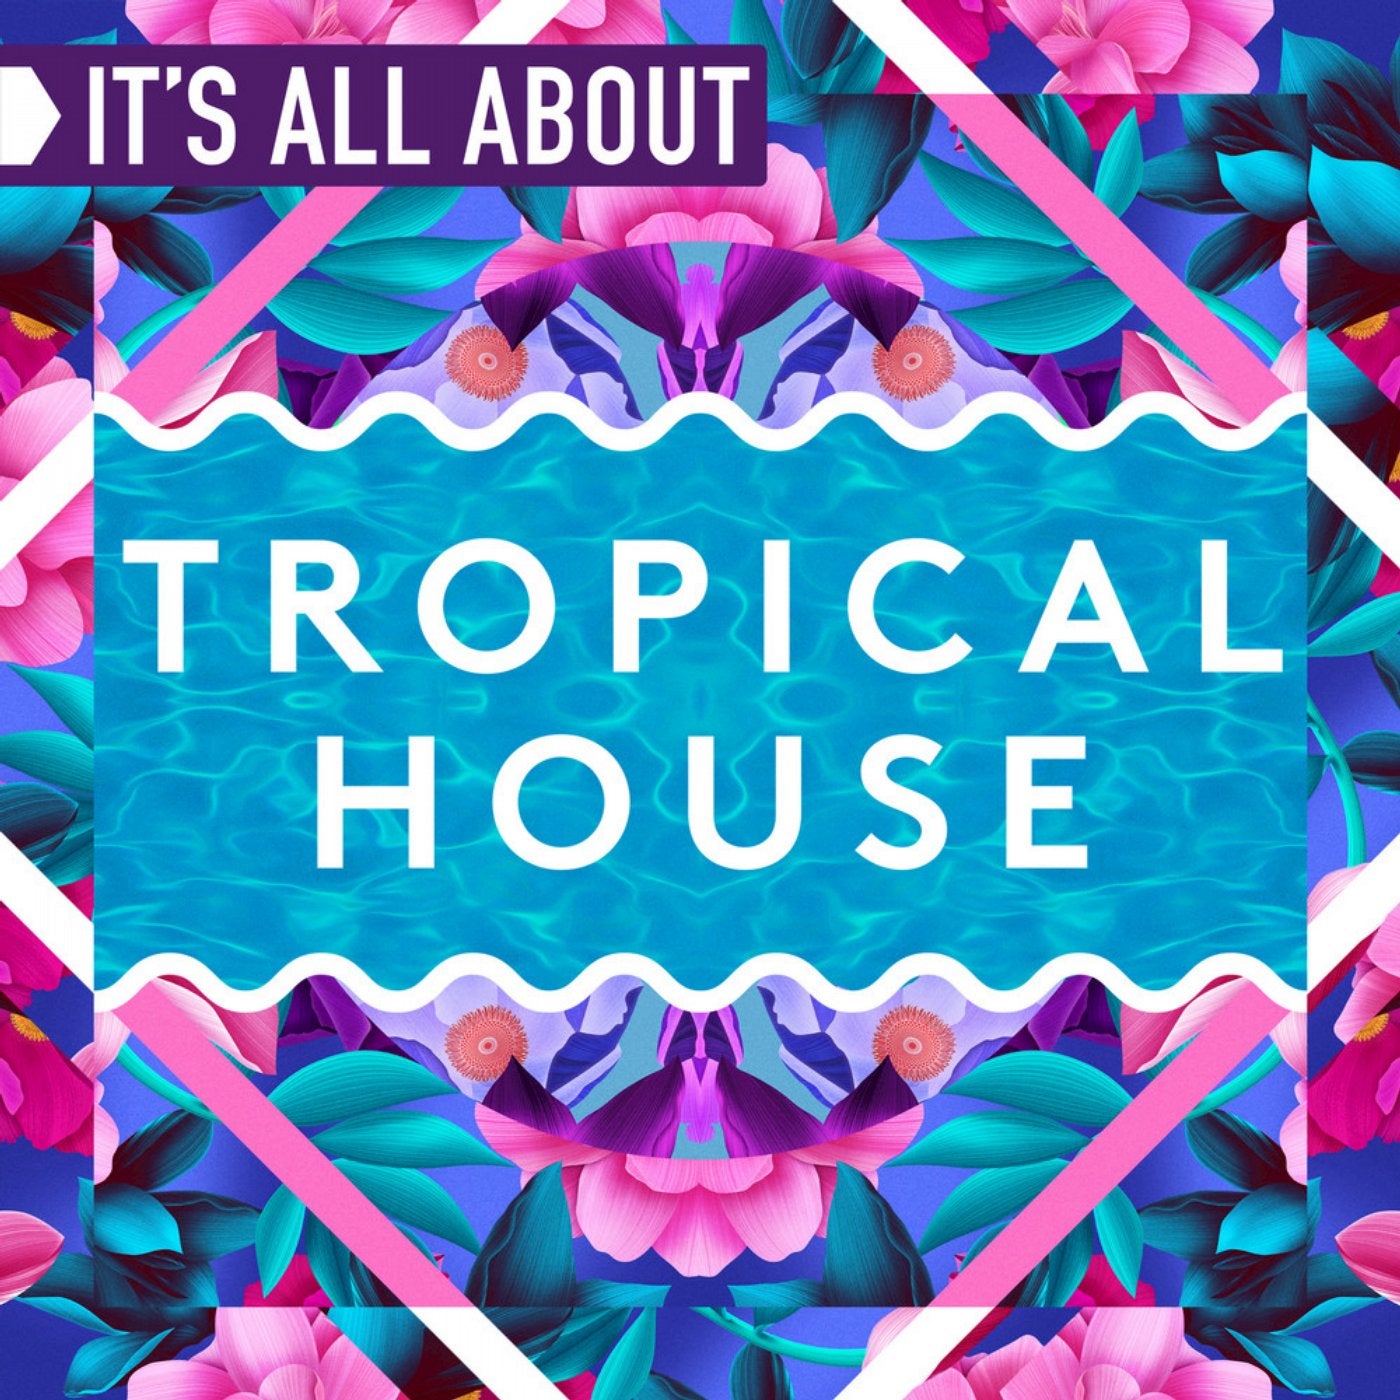 It's All About Tropical House